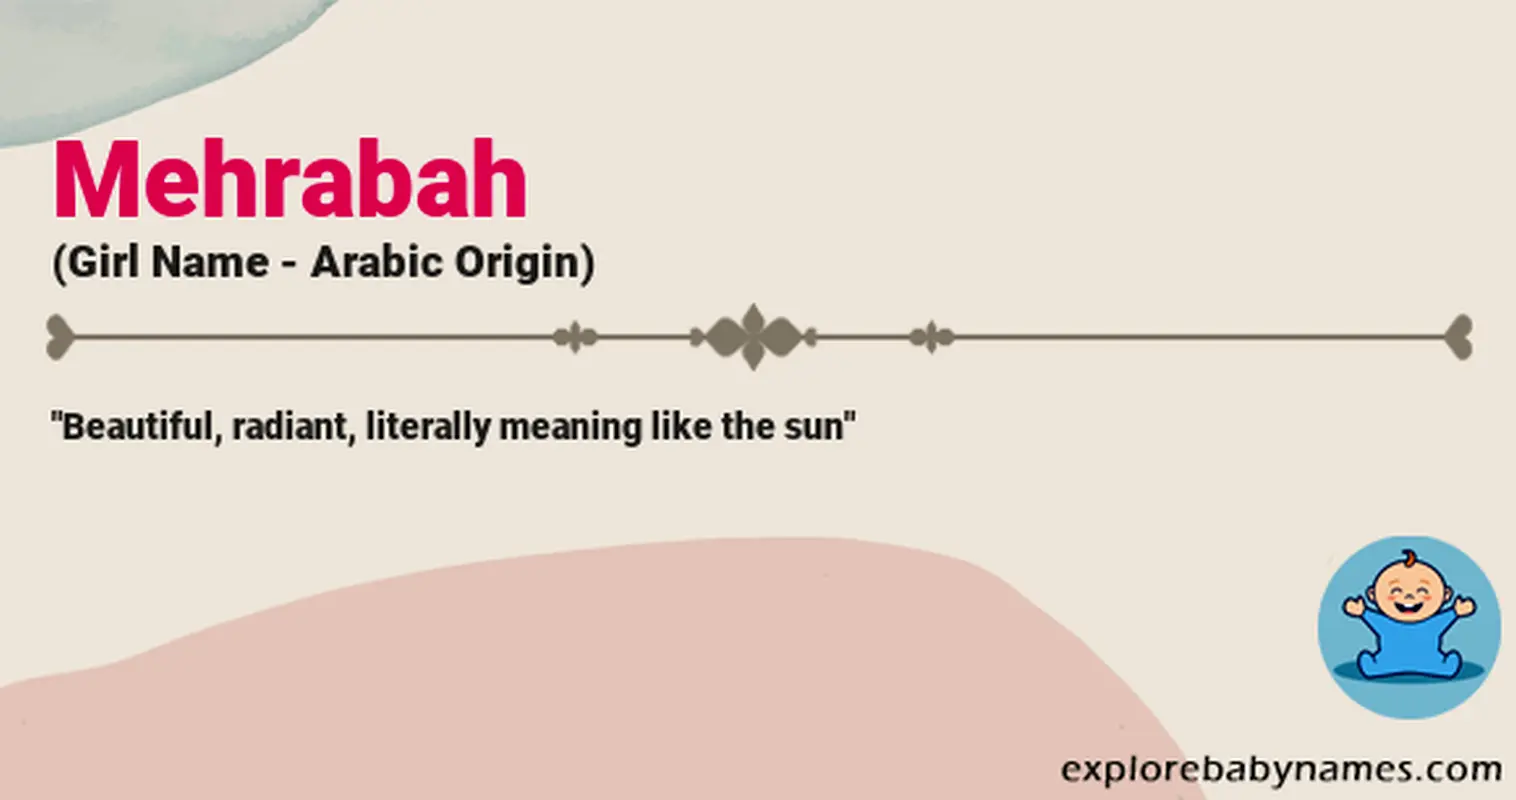 Meaning of Mehrabah